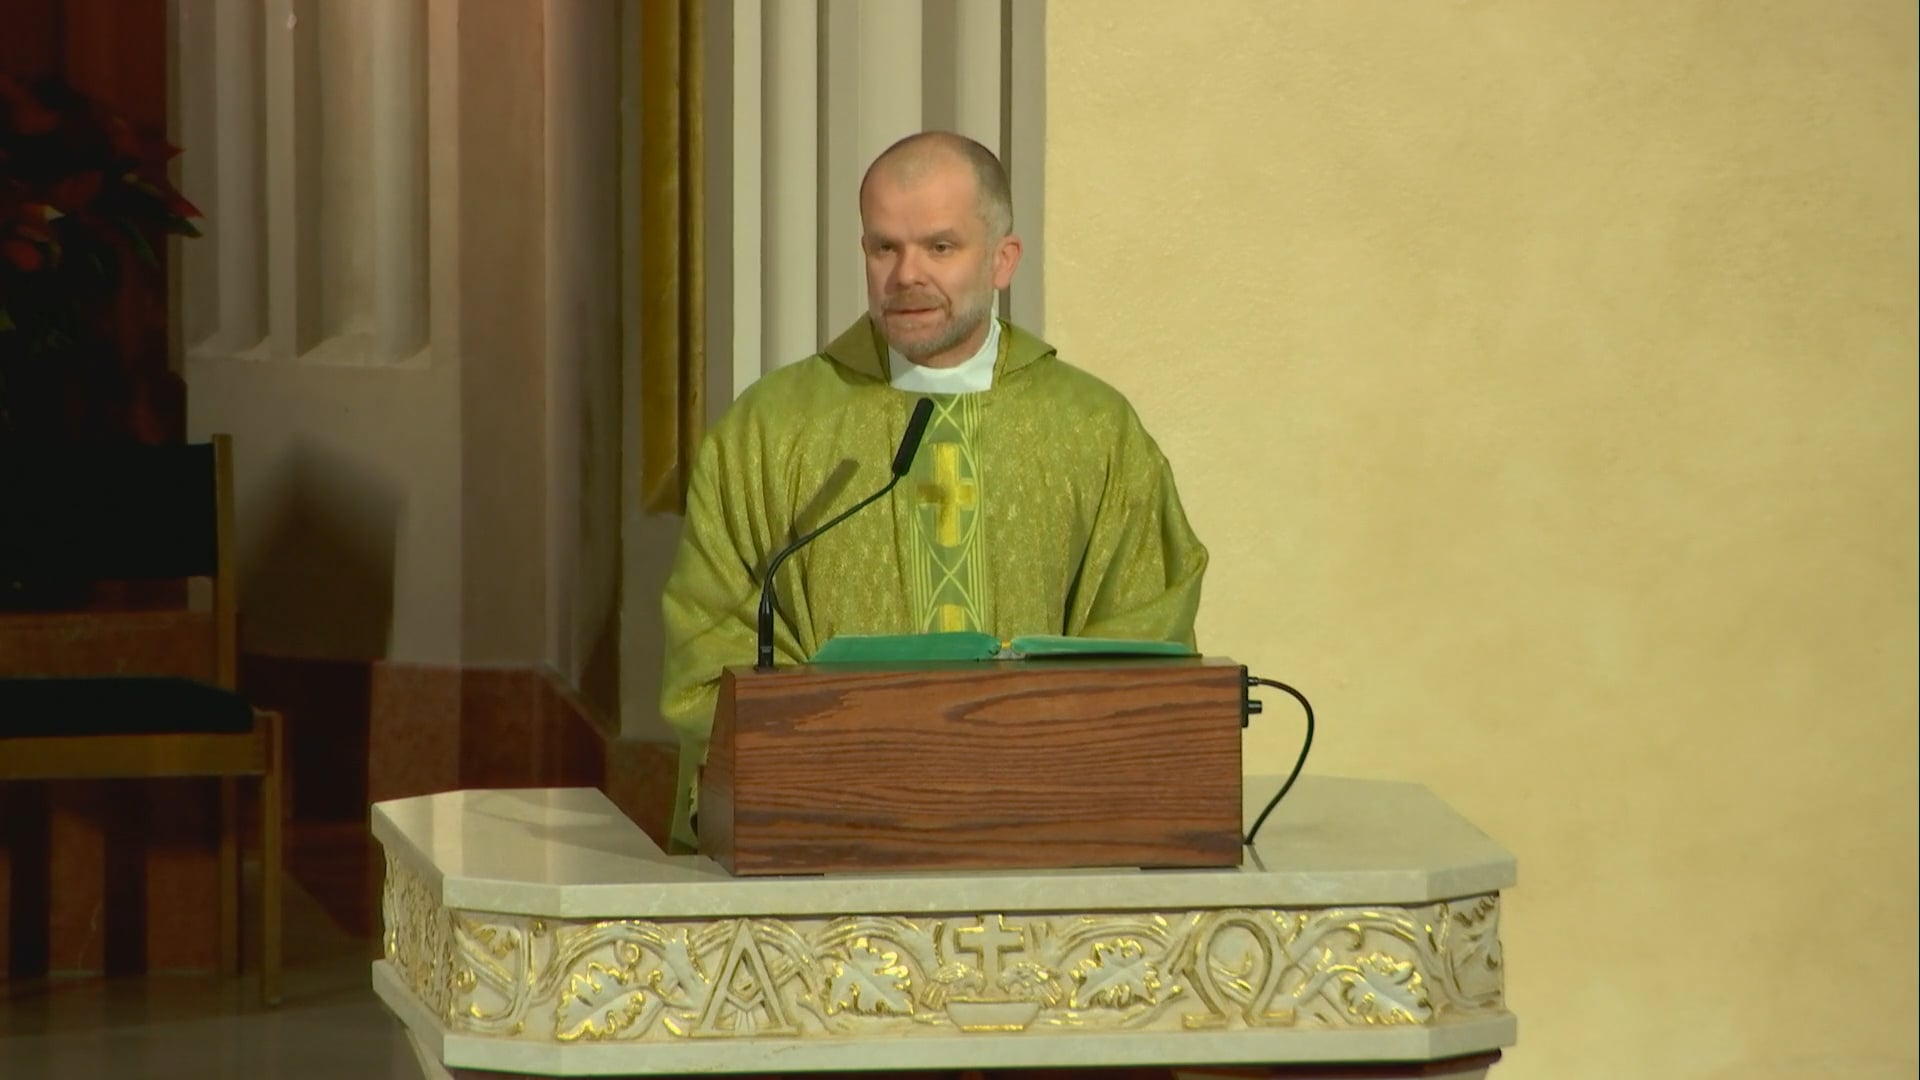 Mass from St. Agnes Cathedral - January 19, 2023